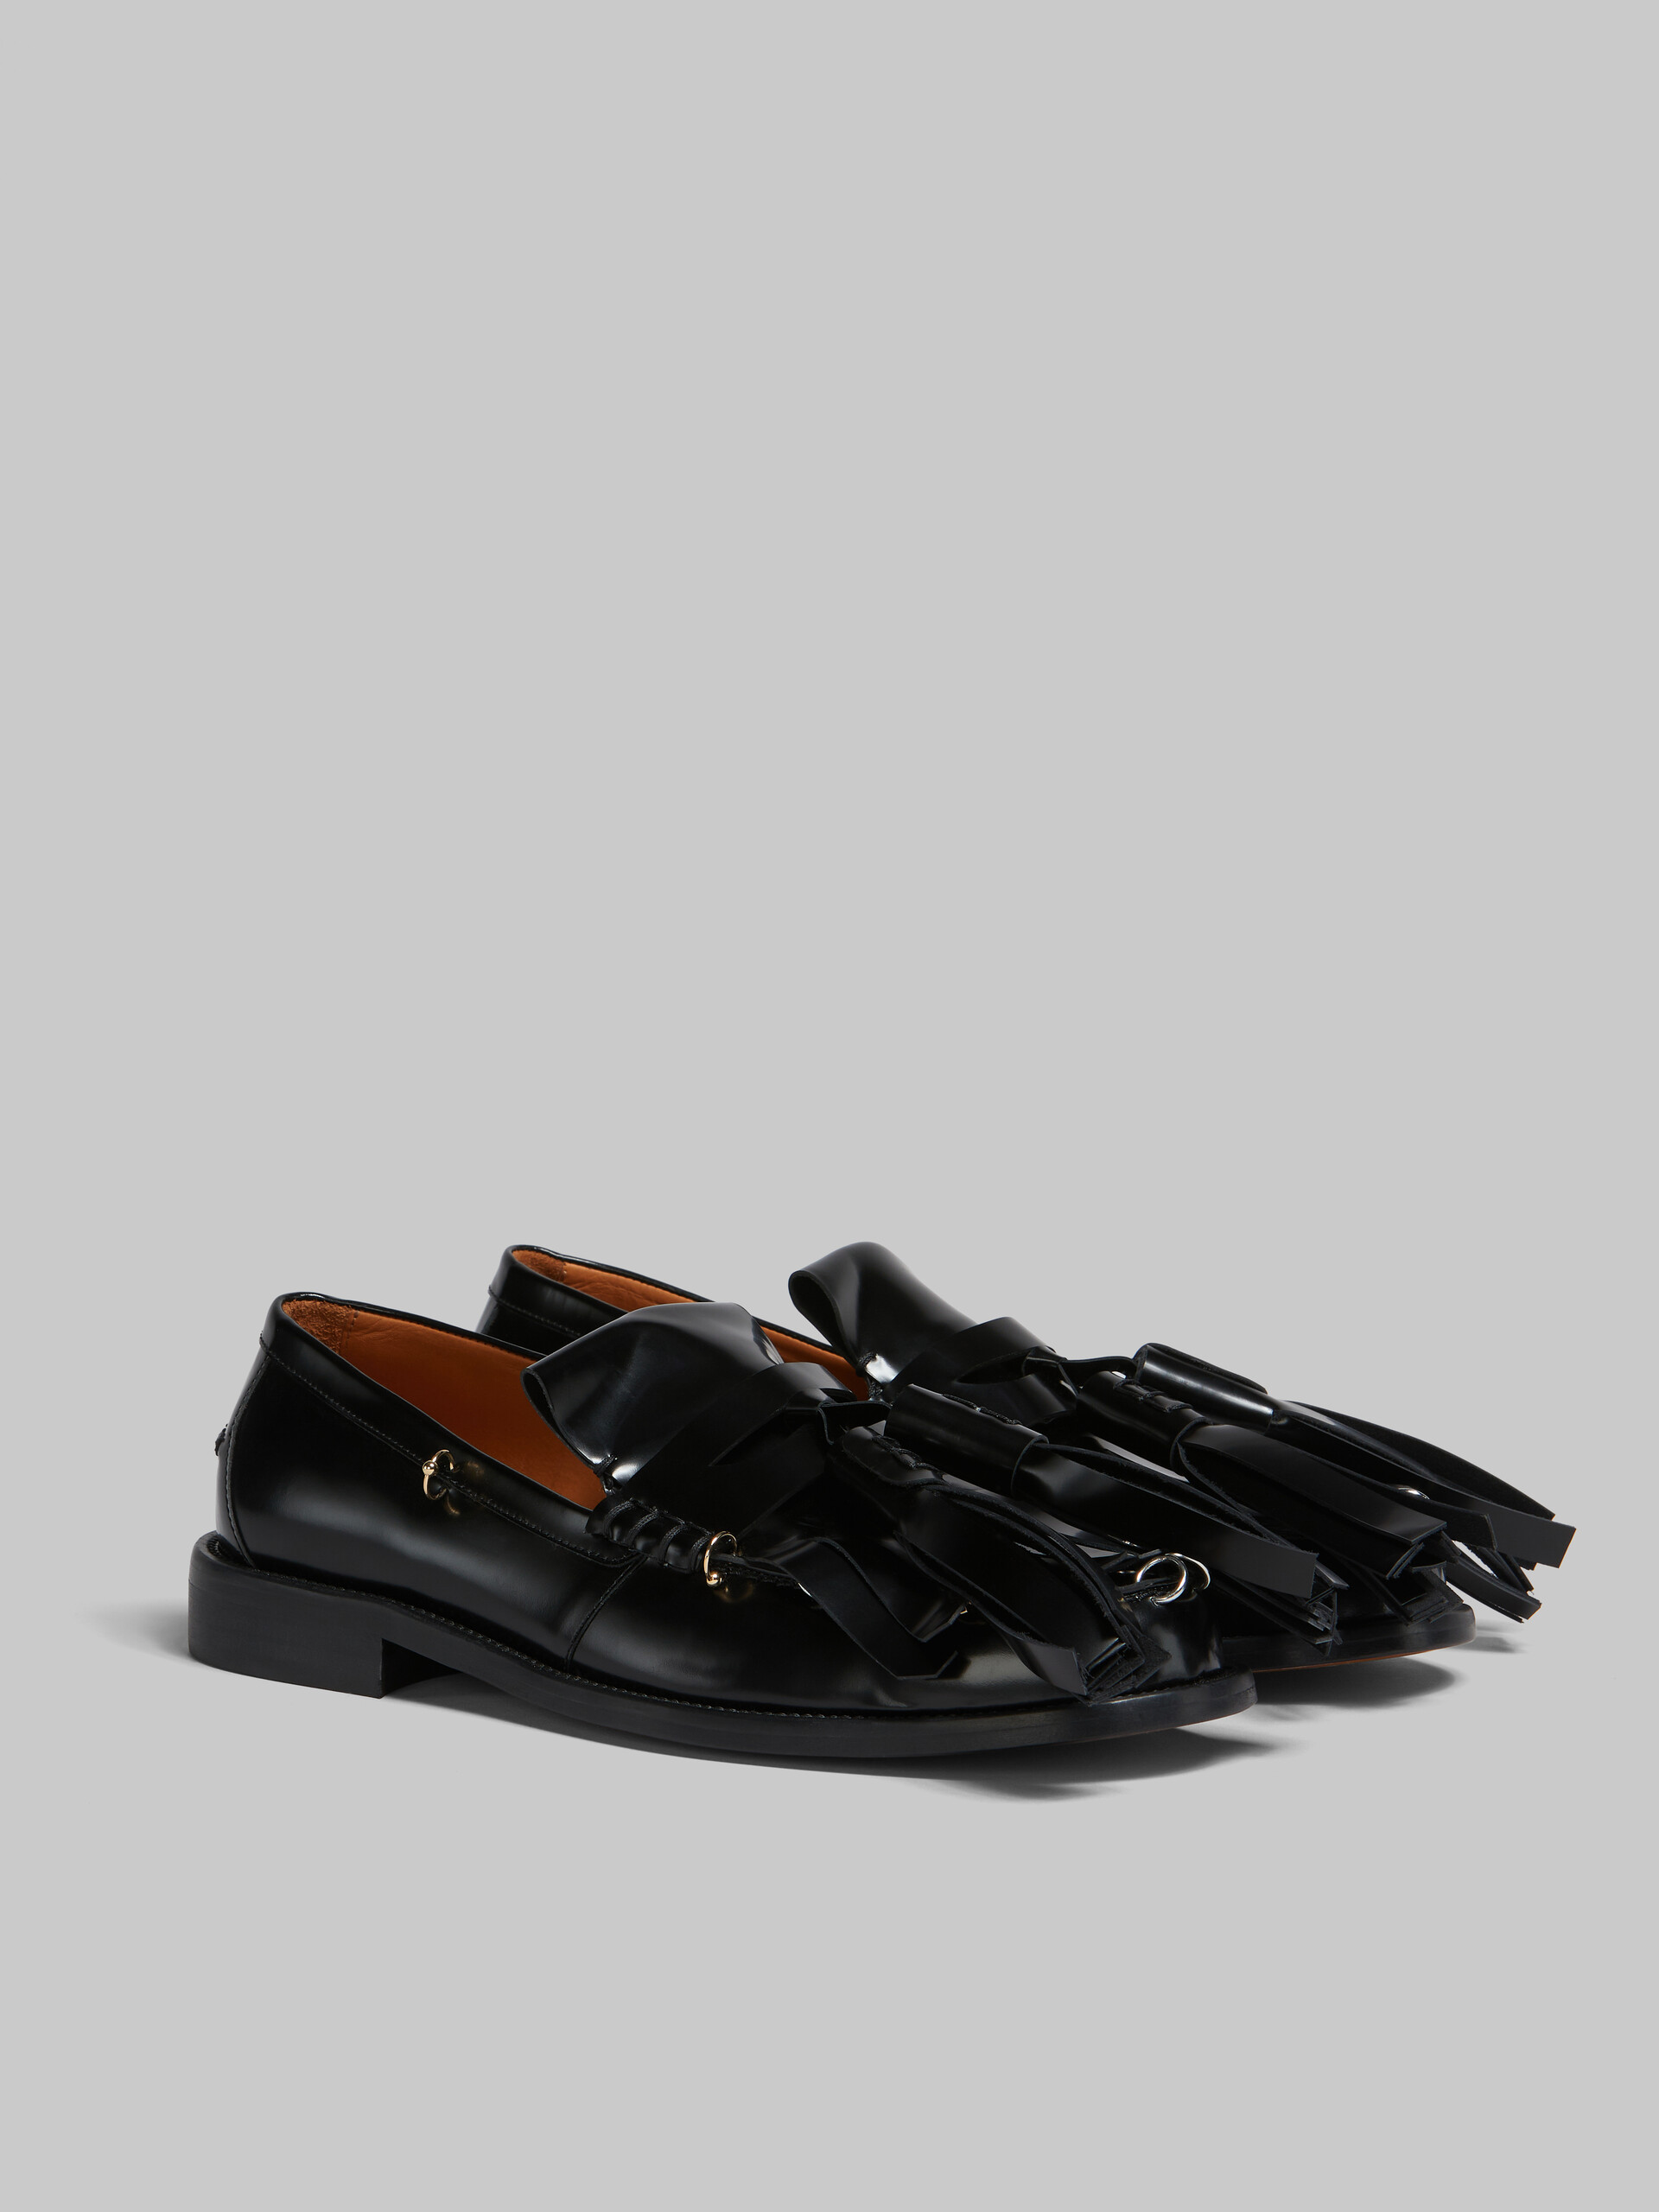 Black leather Bambi loafer with maxi tassels - Mocassin - Image 2